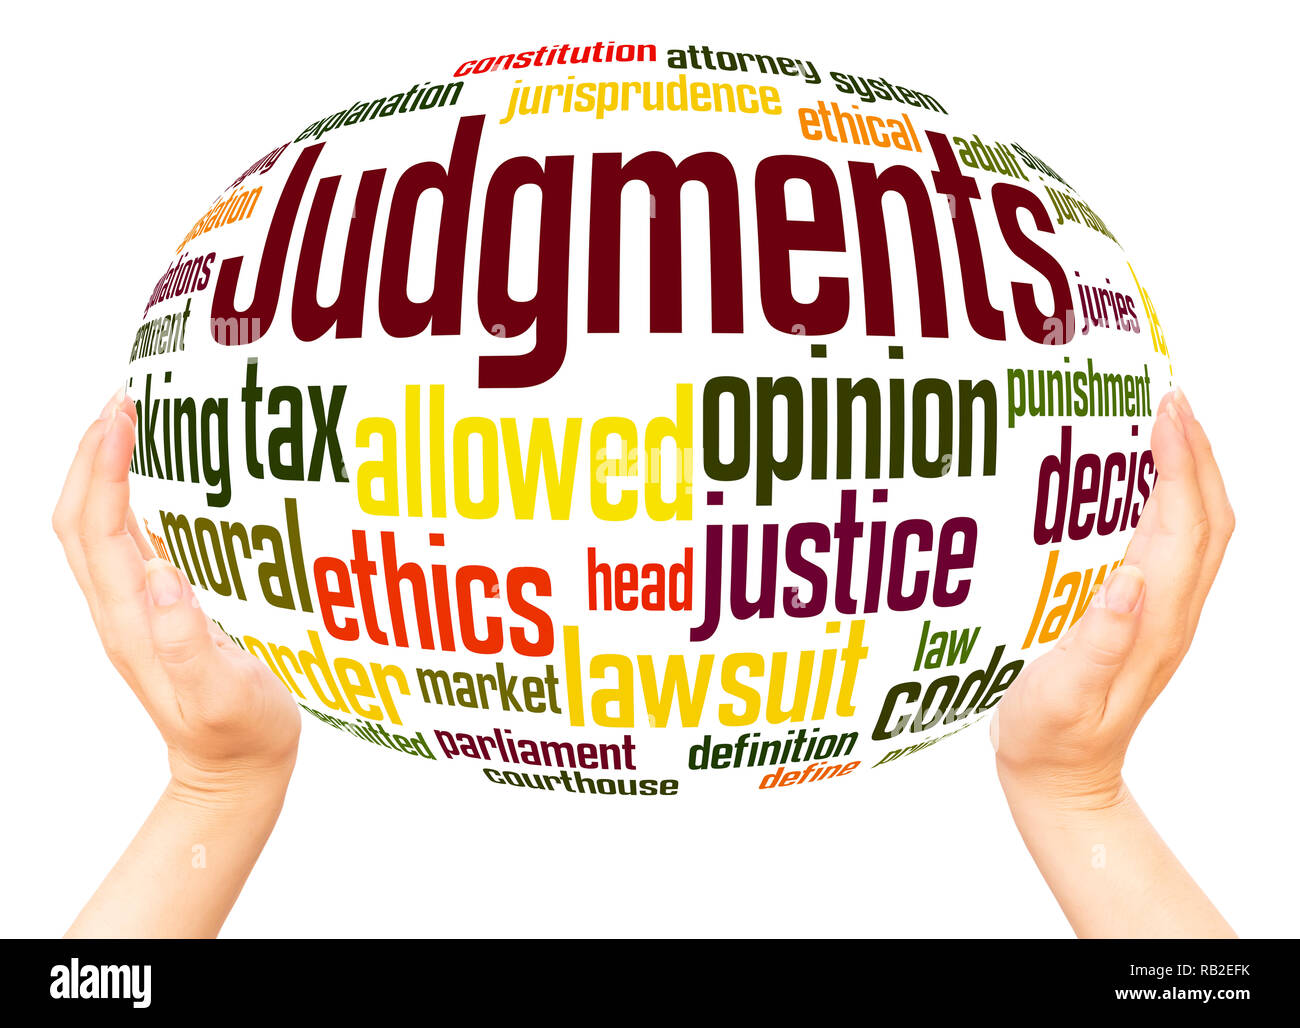 Judgments word cloud hand sphere concept on white background. Stock Photo